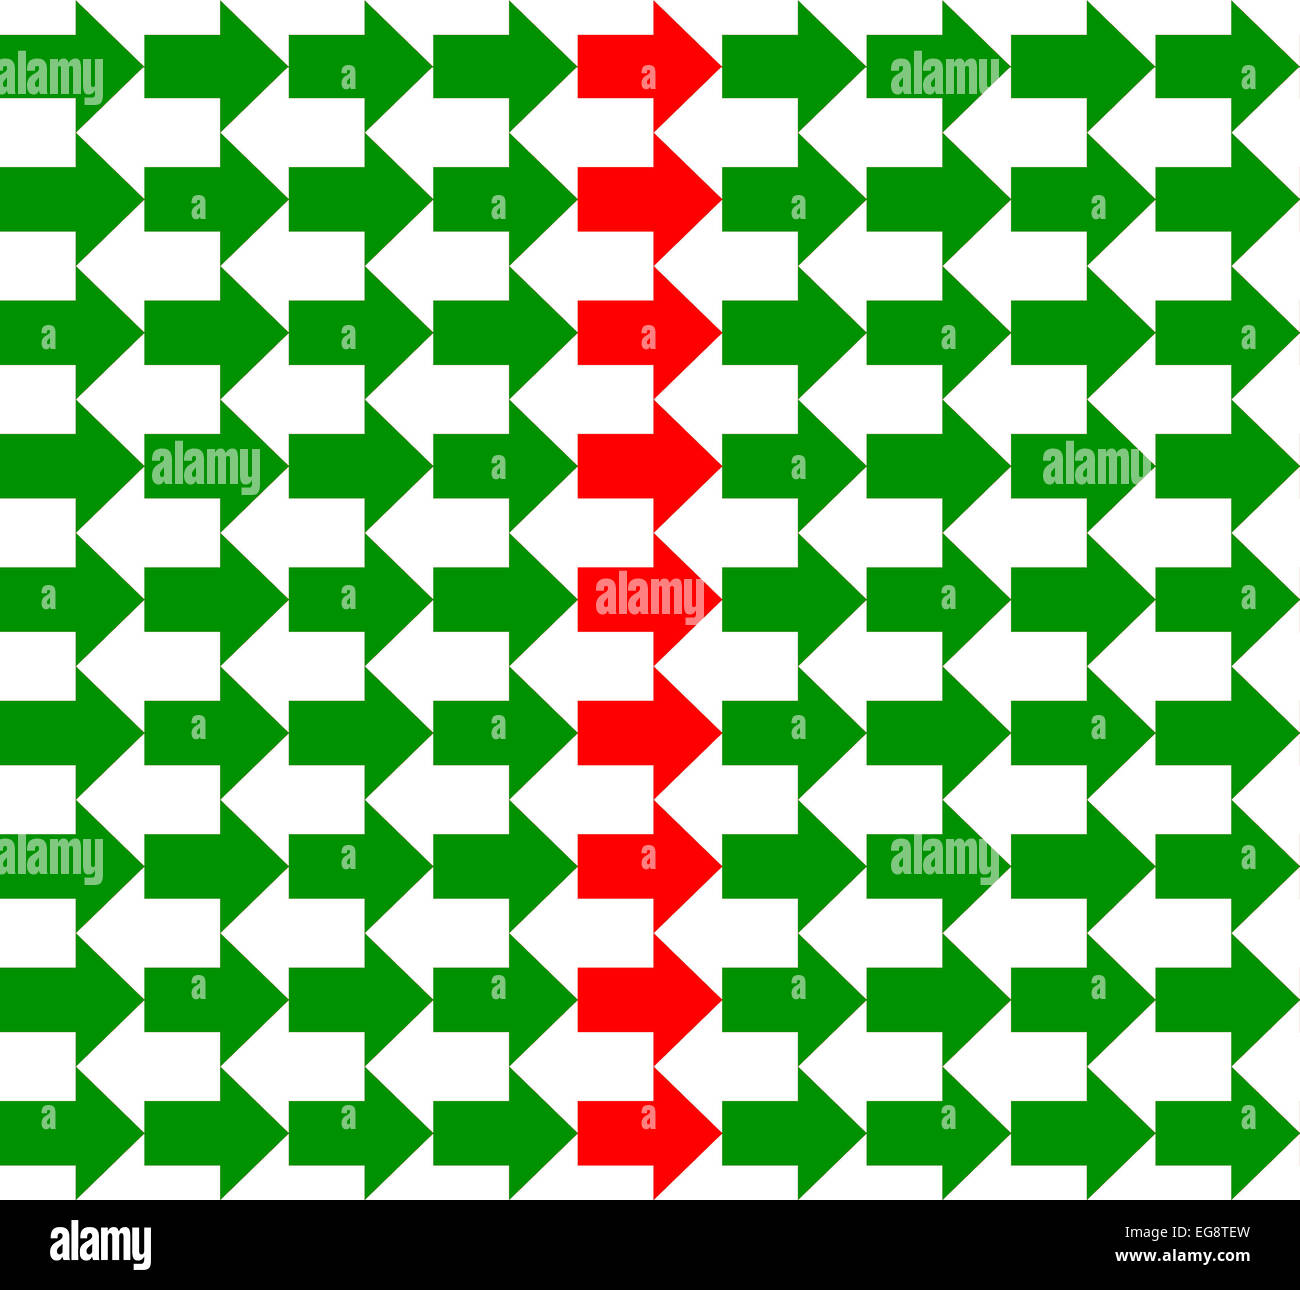 Green and white arrows pointing to opposite directions, with a red row in the middle, seamless pattern Stock Photo